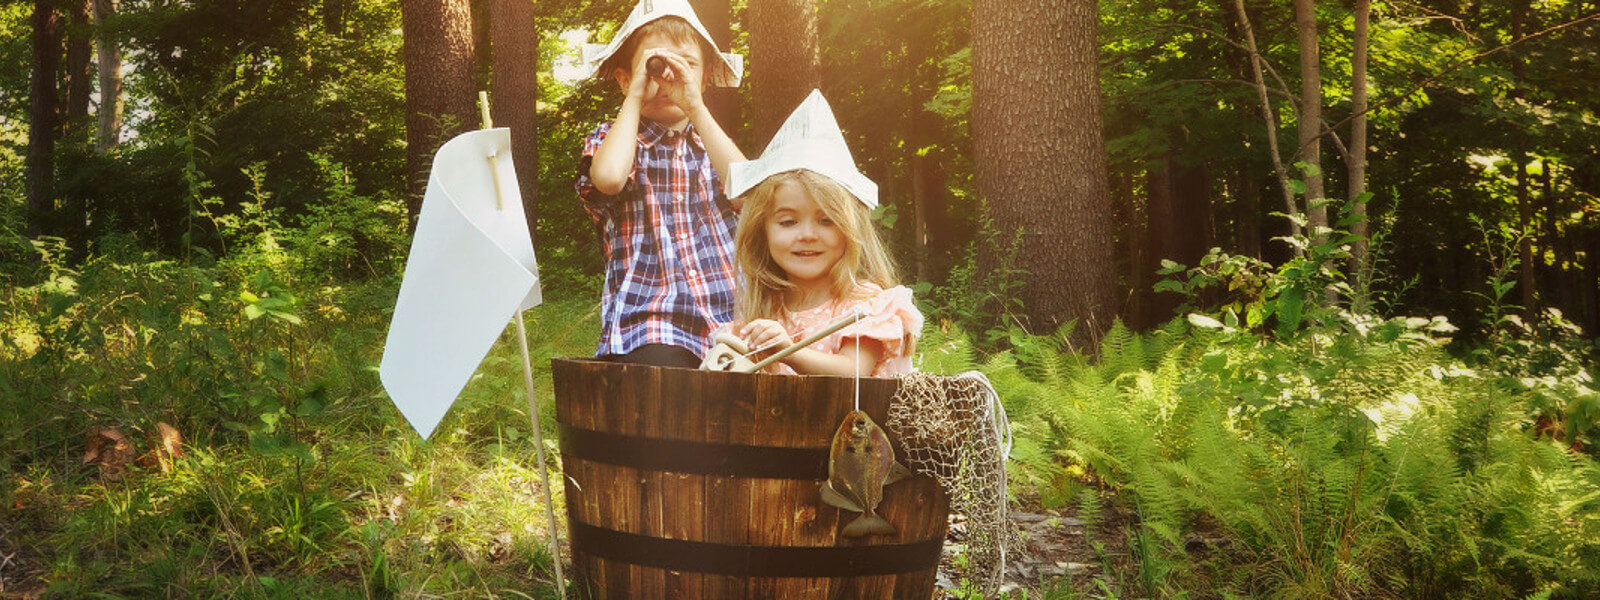 Two children sit in a wooden barrel in the woods, pretending to be sailors.